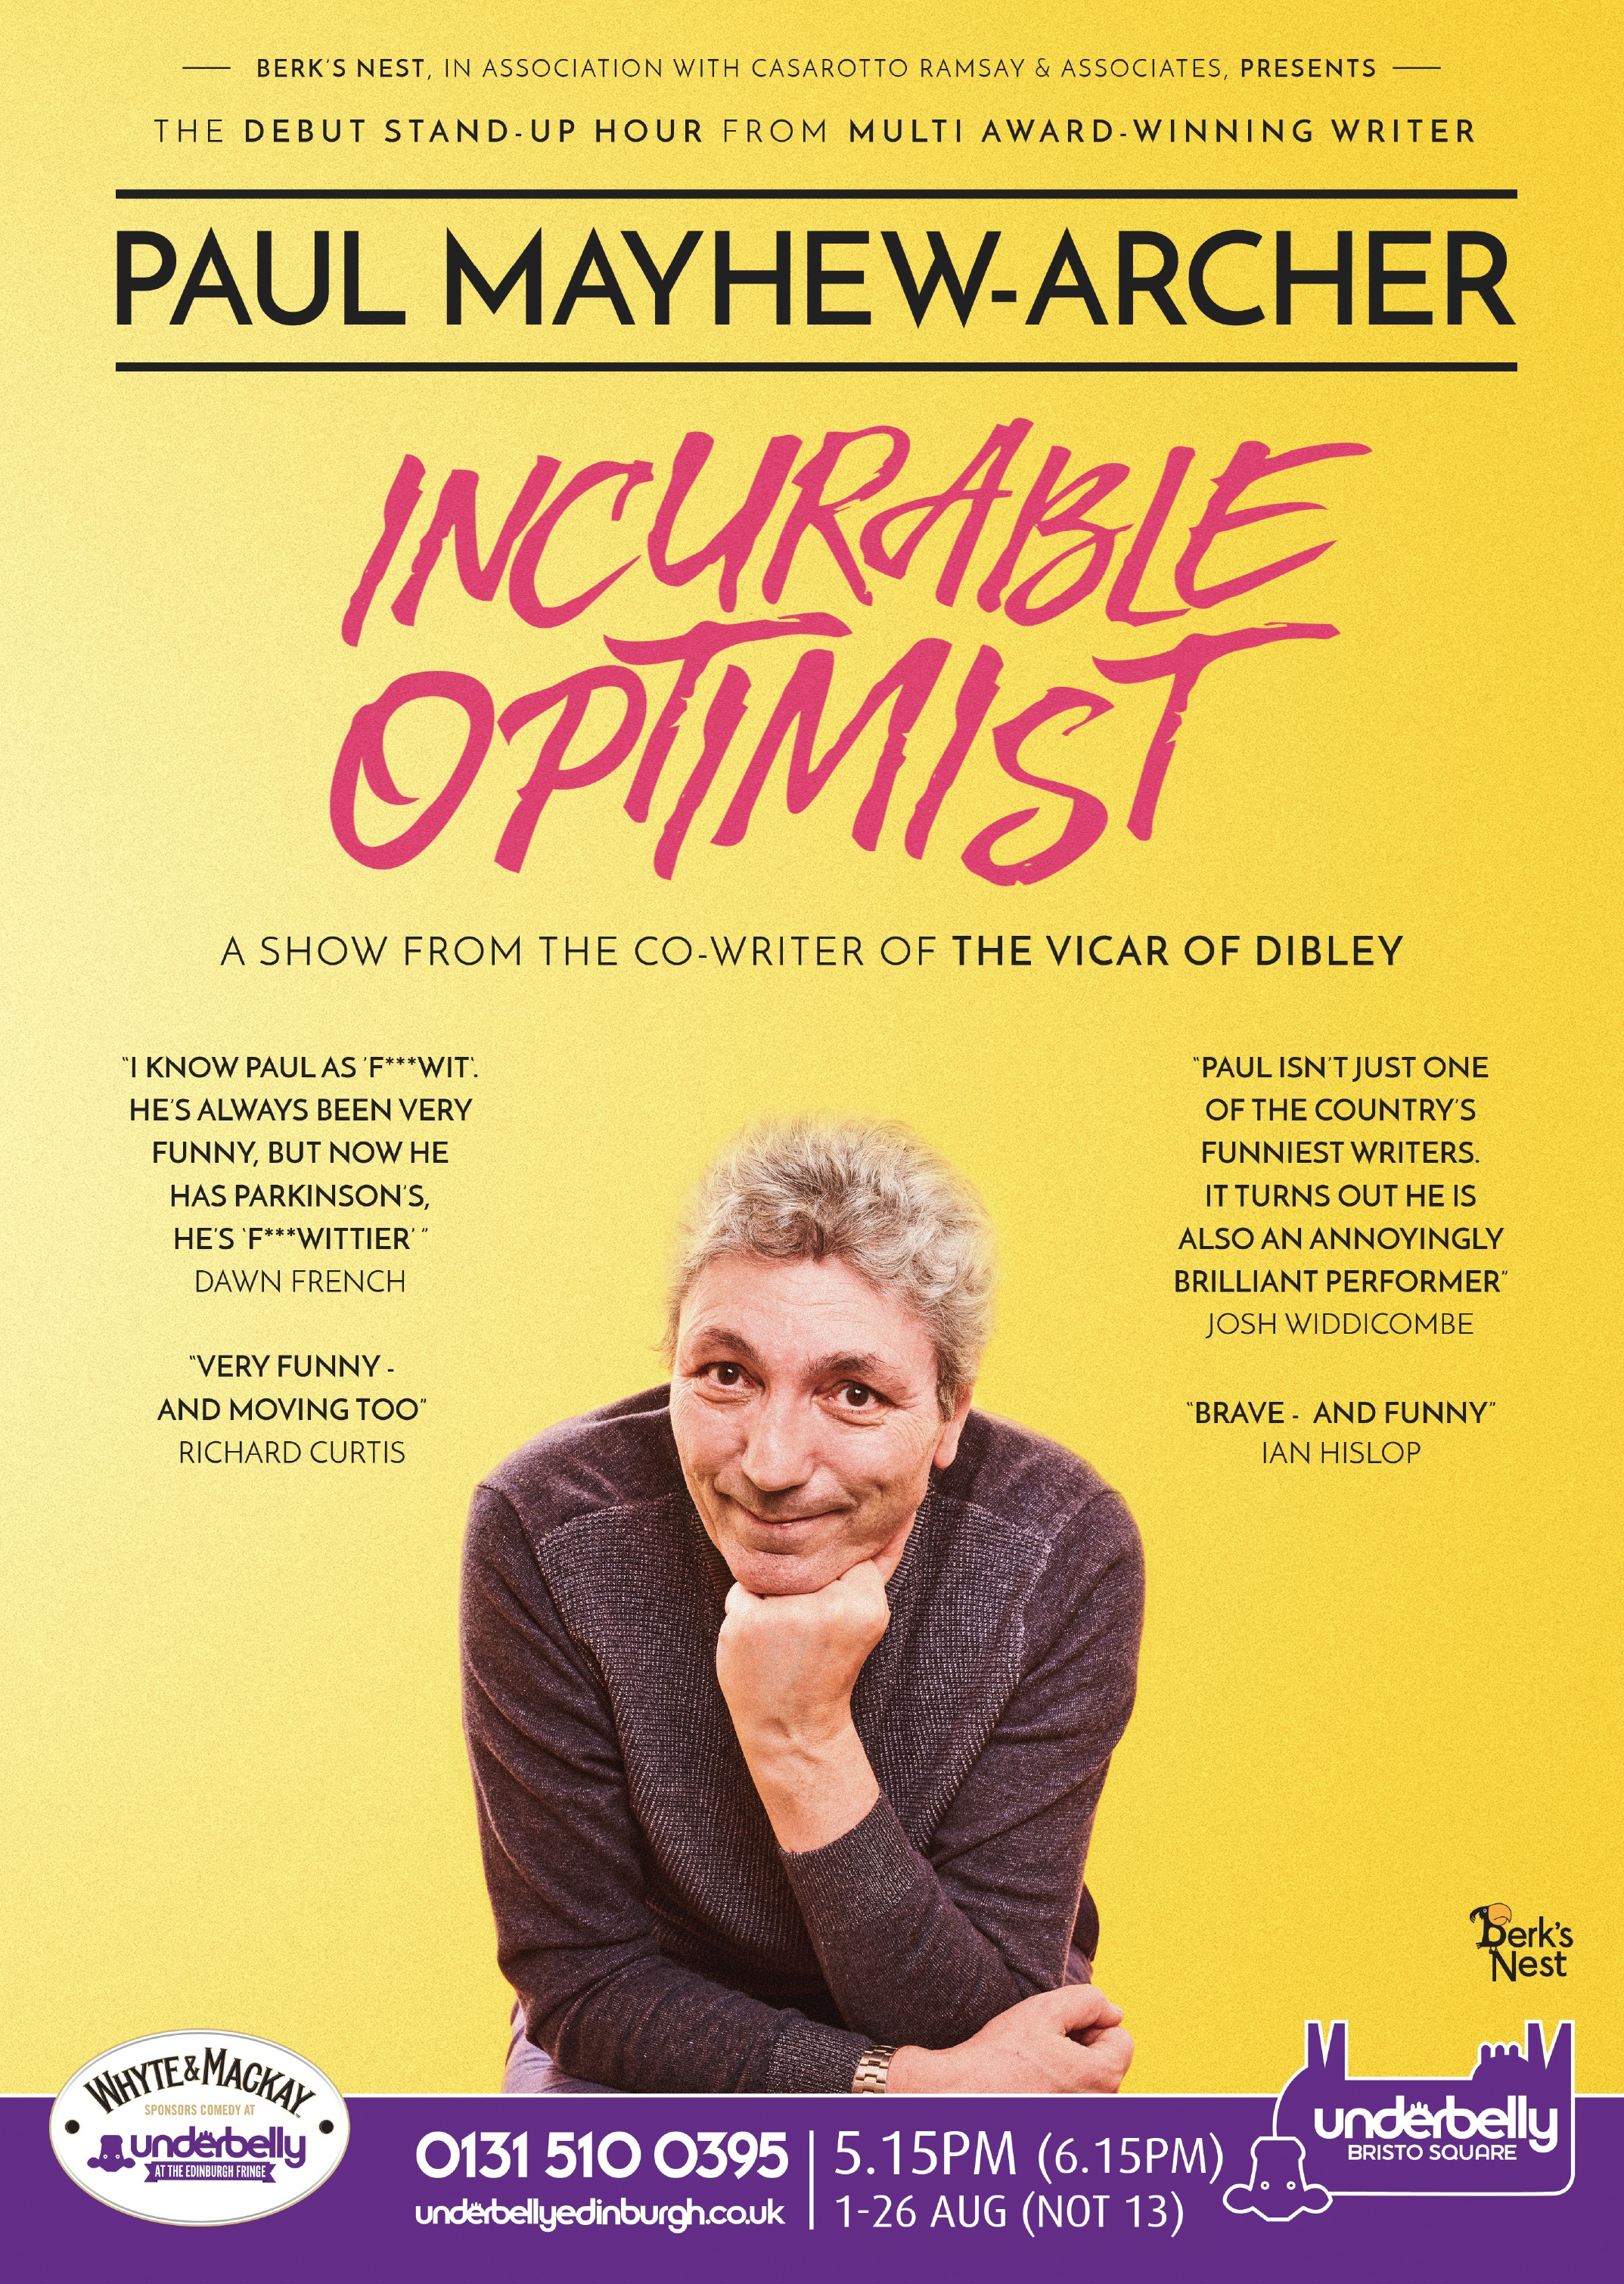 The poster for Paul Mayhew-Archer: Incurable Optimist